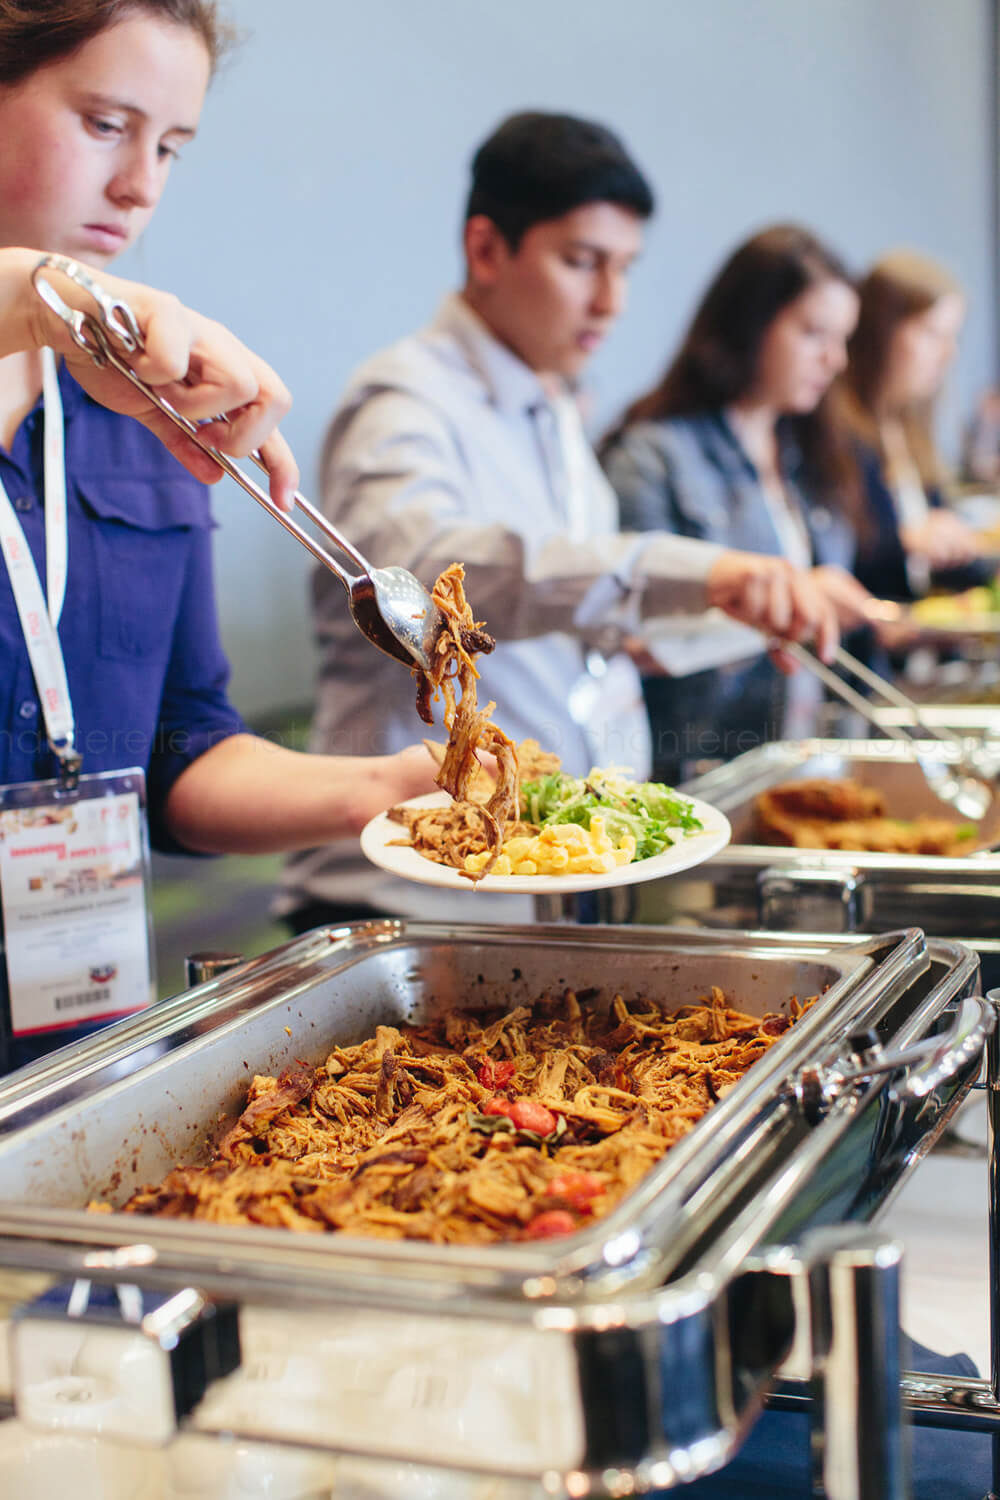 pulled pork at 2018 rca conference